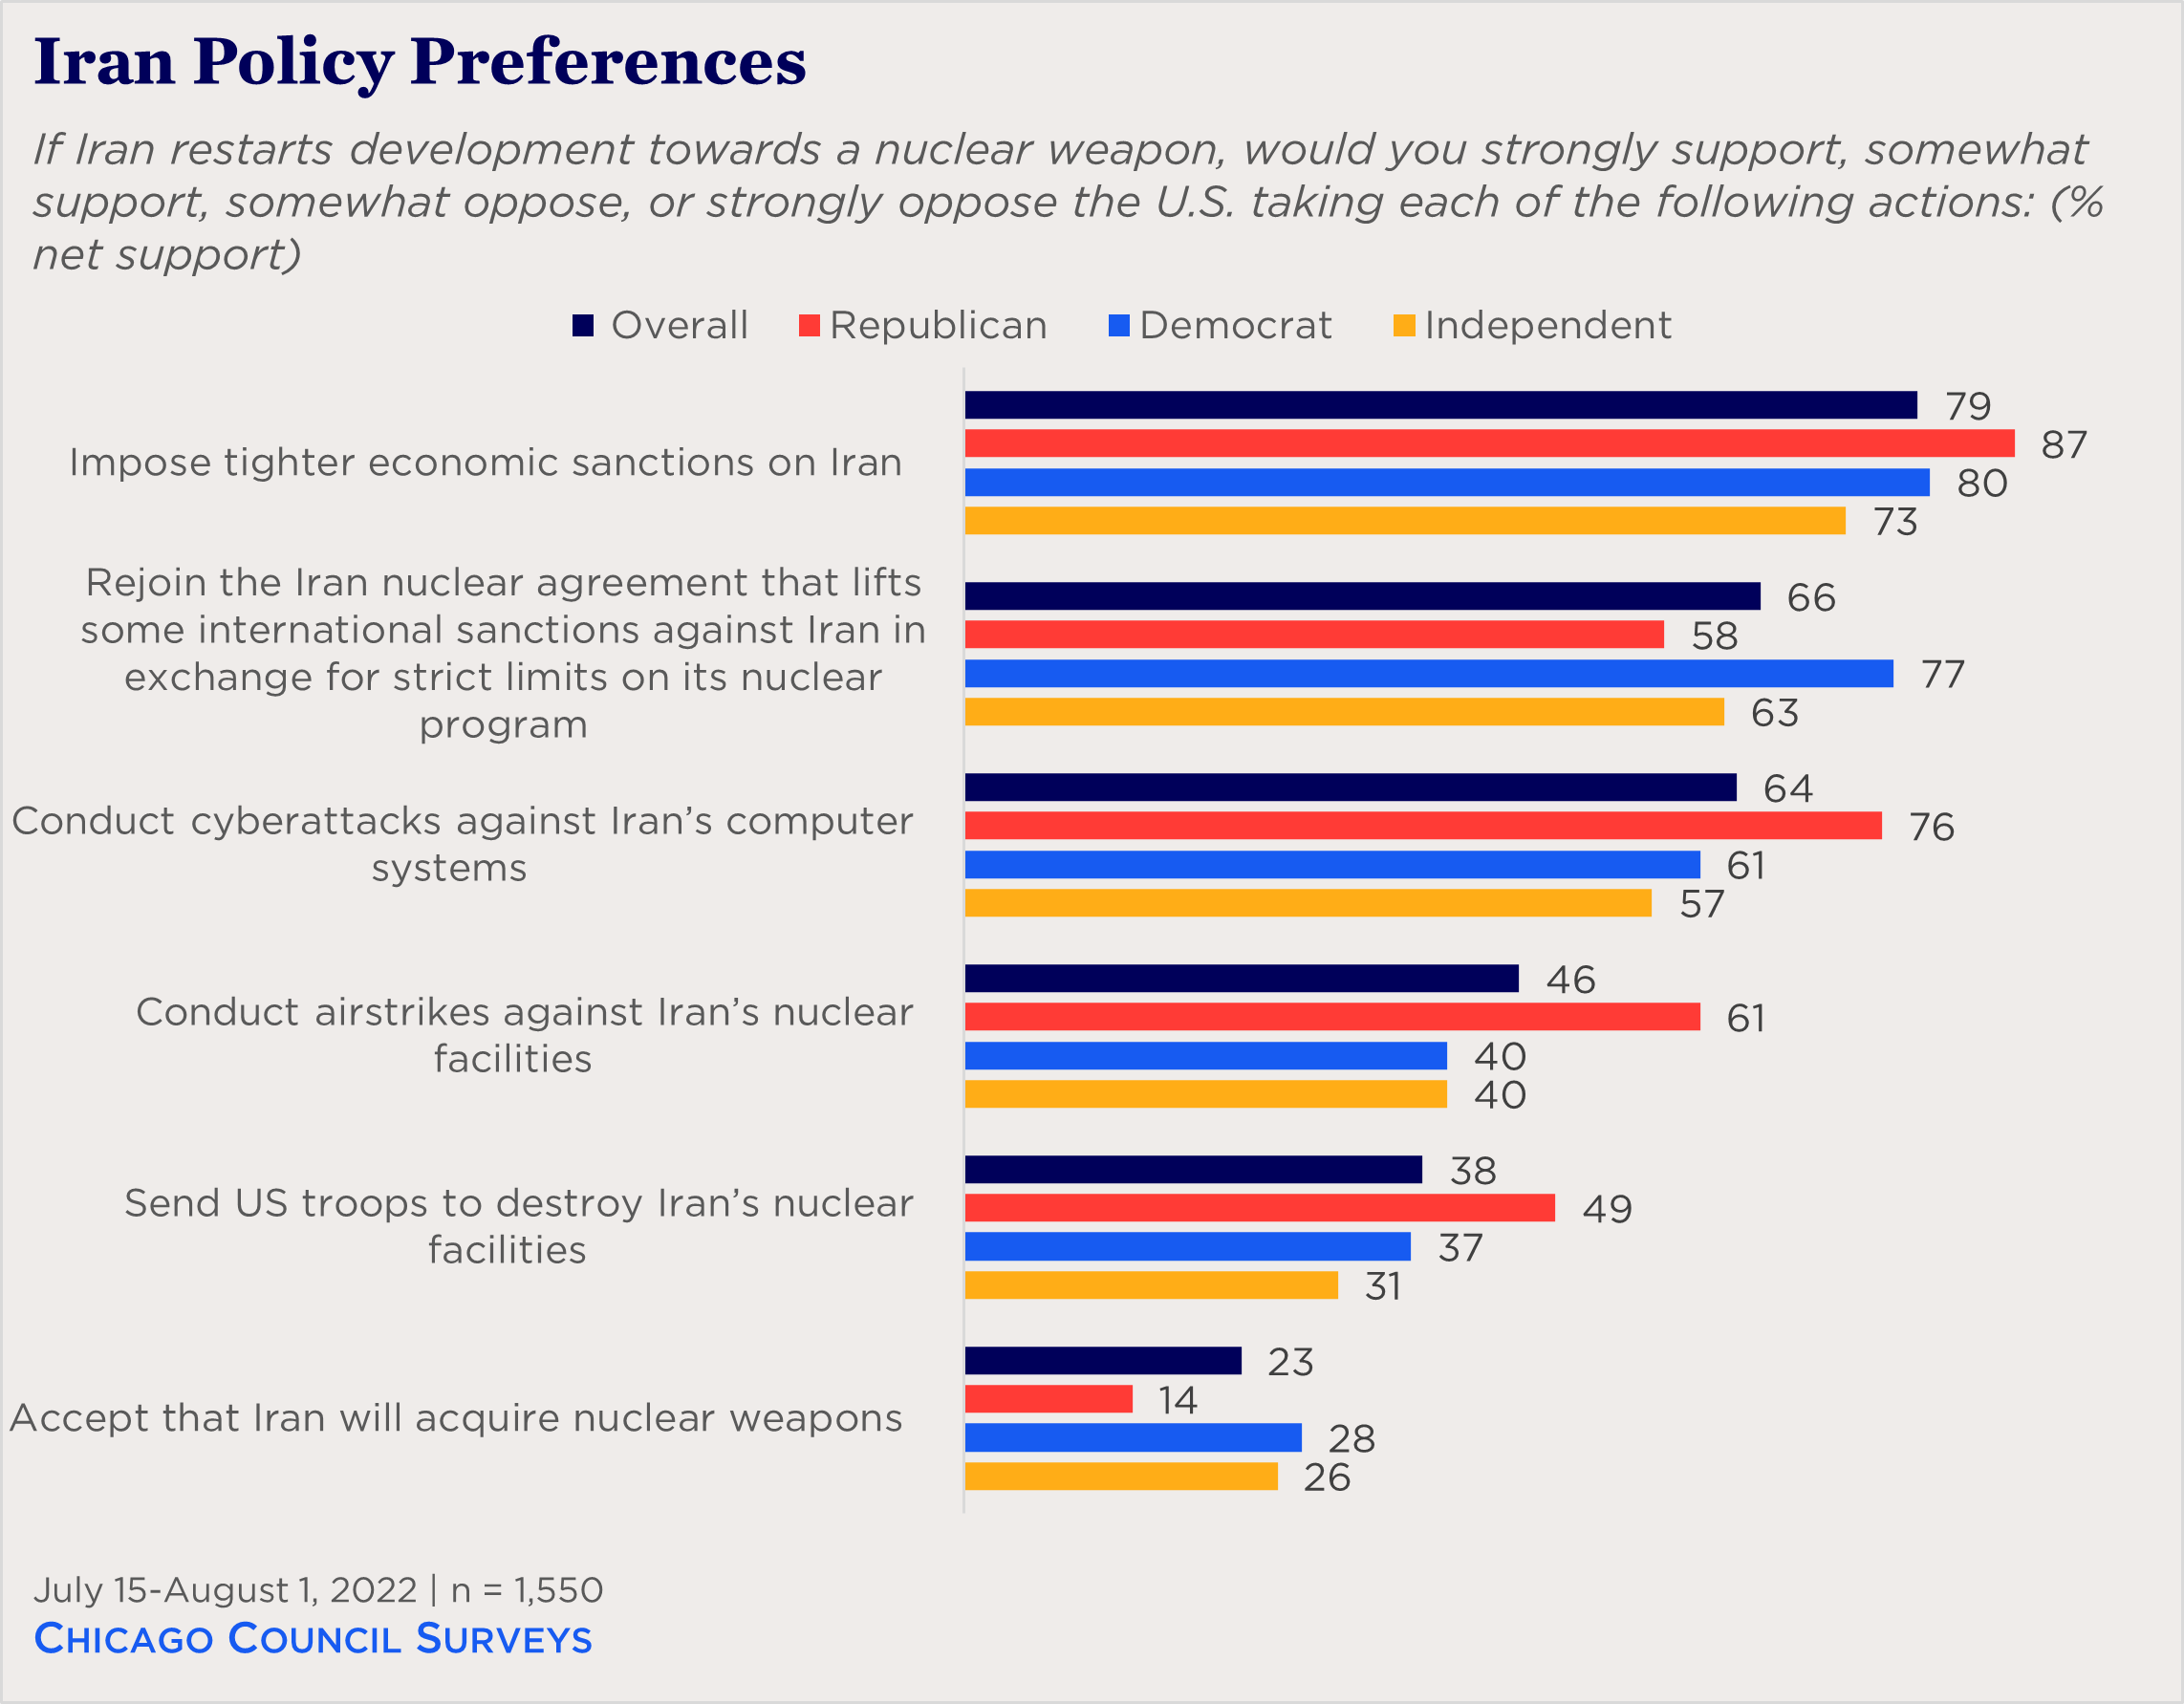 "bar chart showing partisan splits on iran policy preferences"